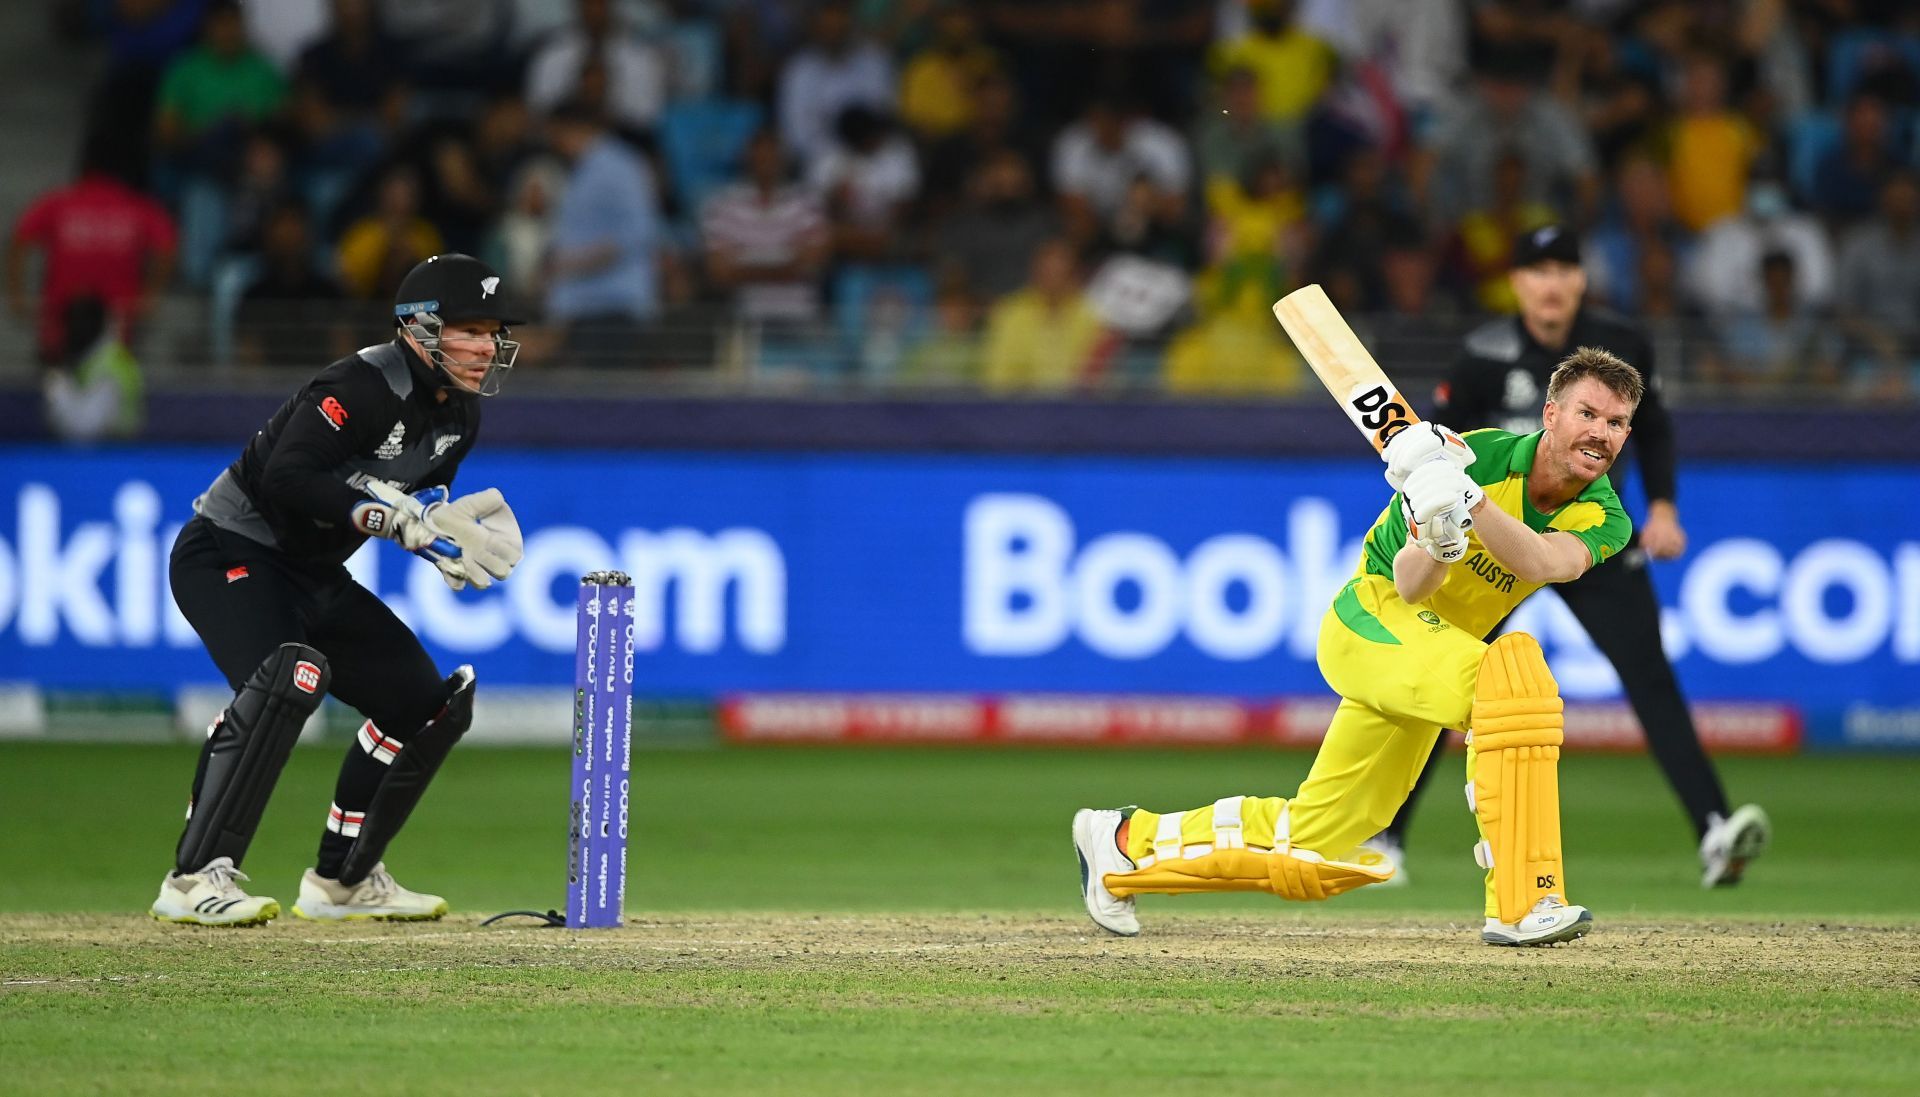 David Warner was in excellent form during the ICC T20 World Cup 2021